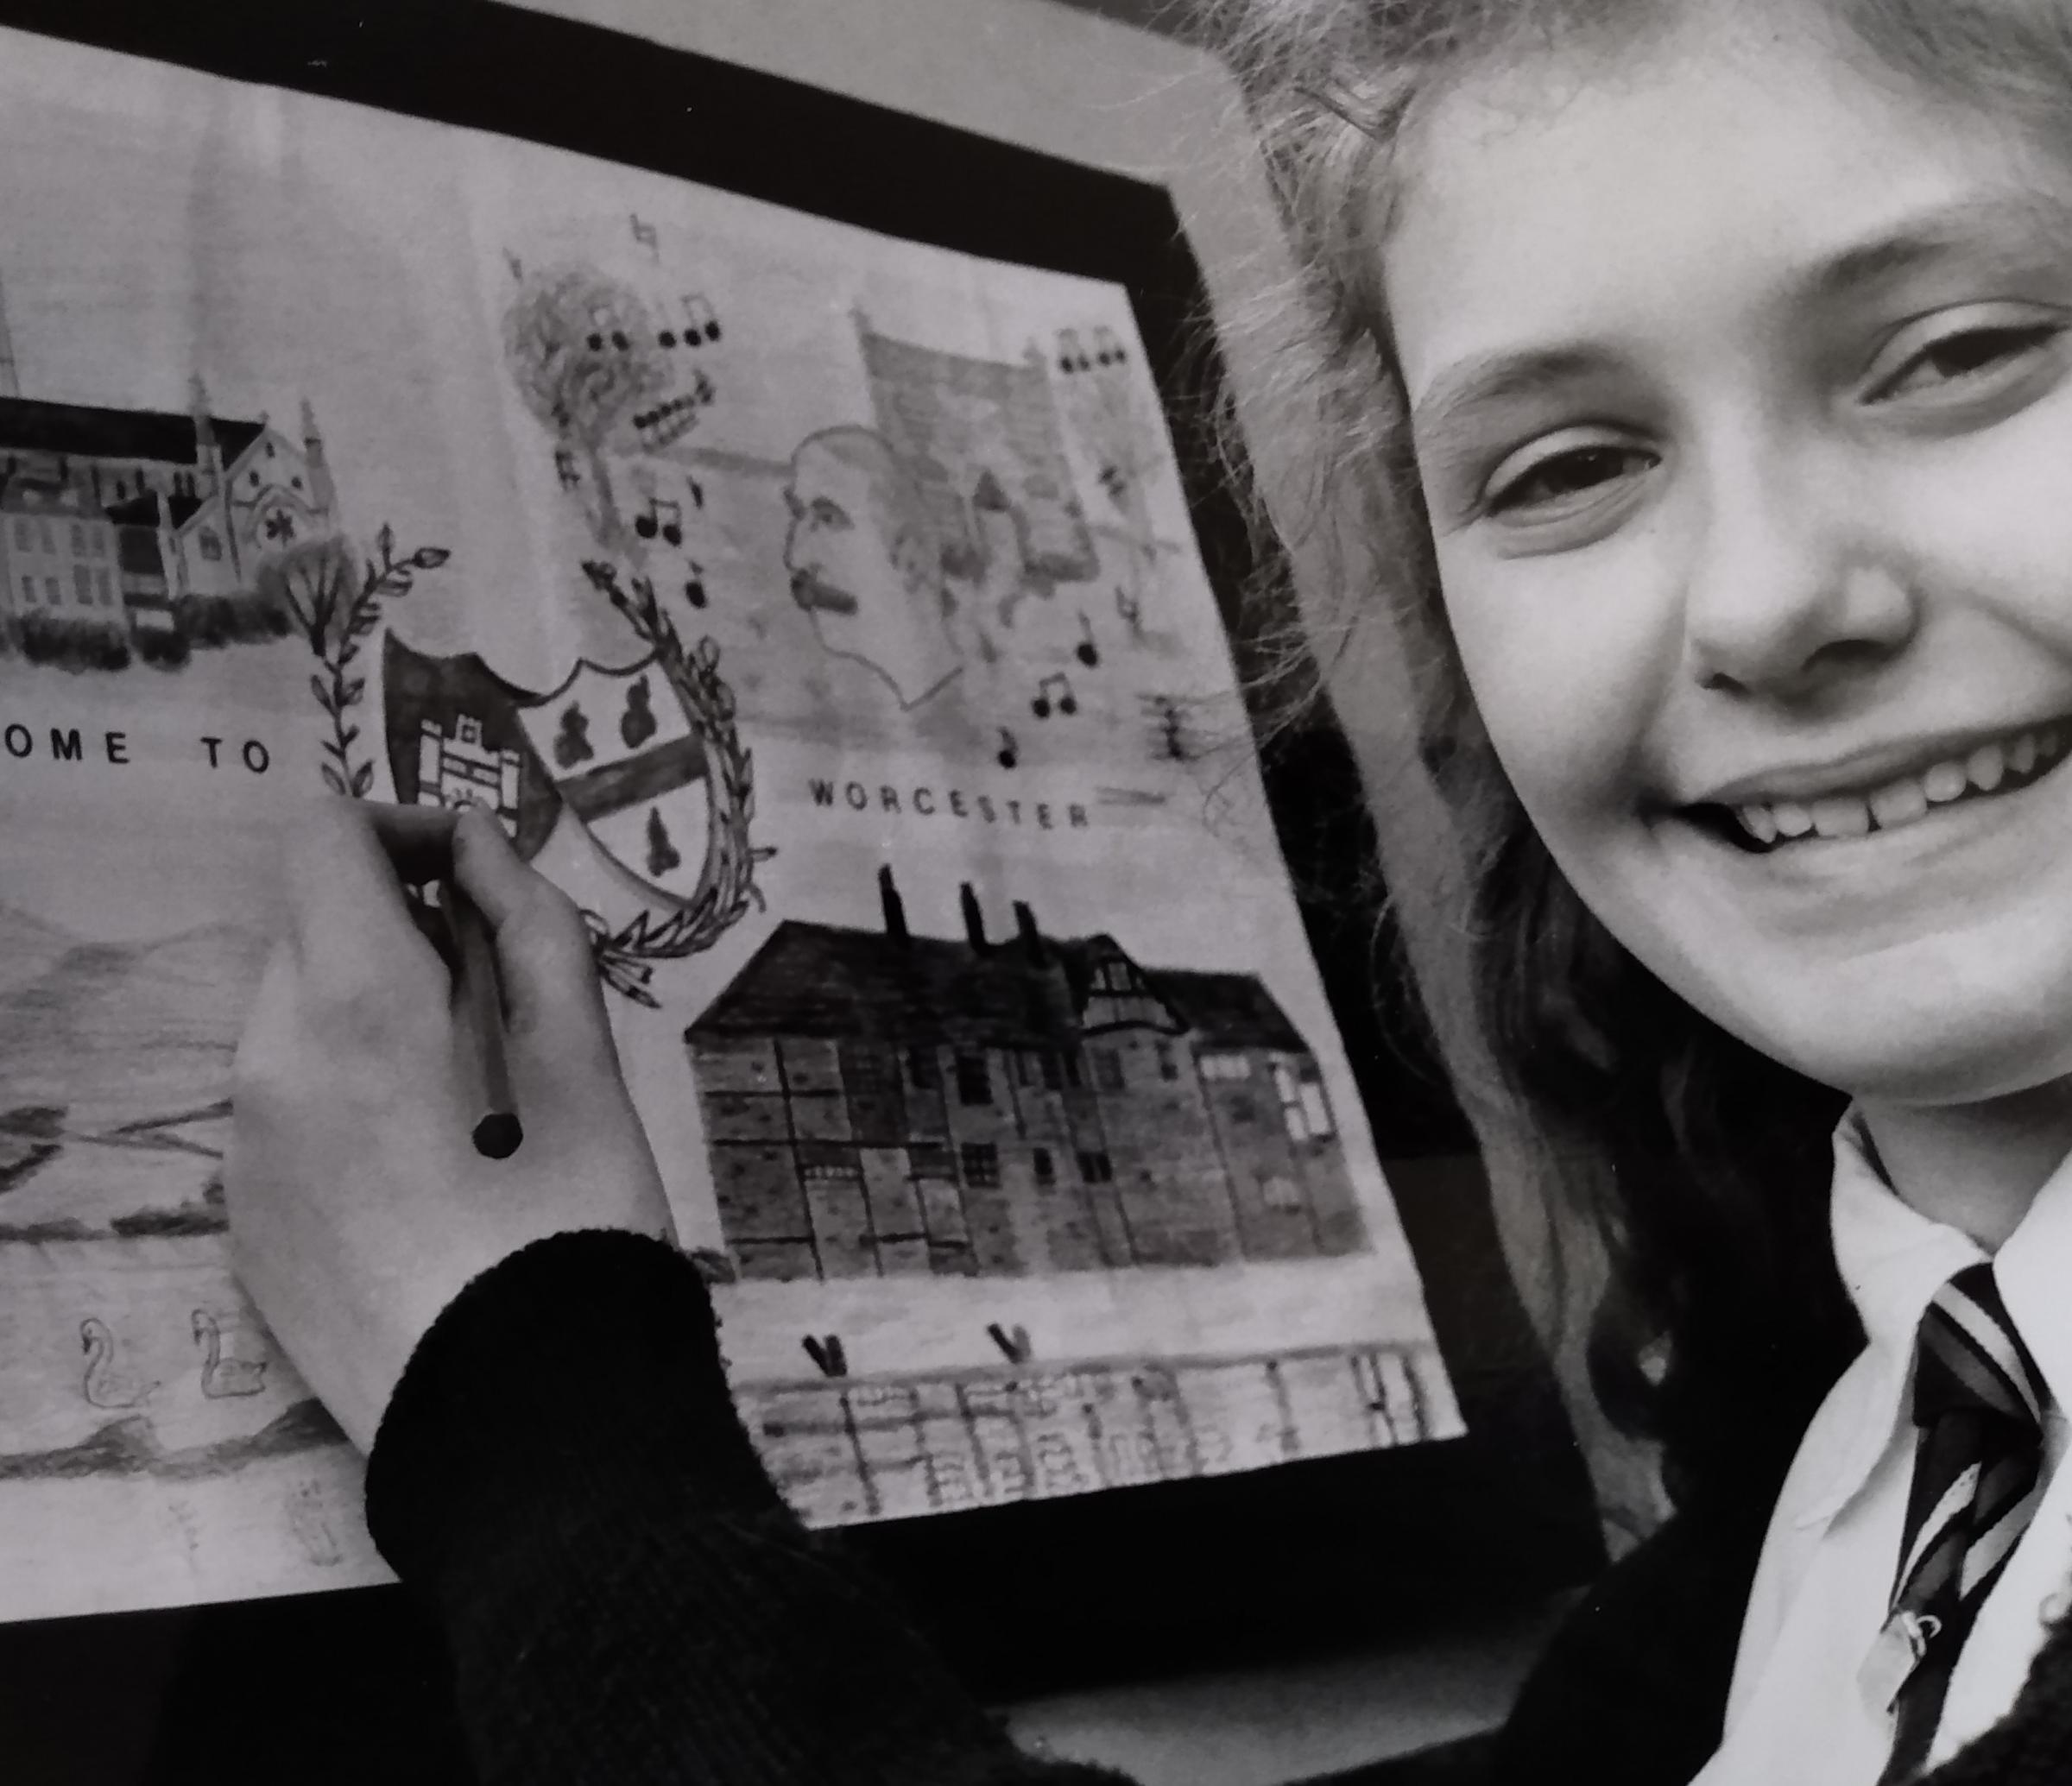 January 1992 and Angela Huckridge, 12, won the Lychgate Painting competition to design a poster to welcome visitors to Worcester